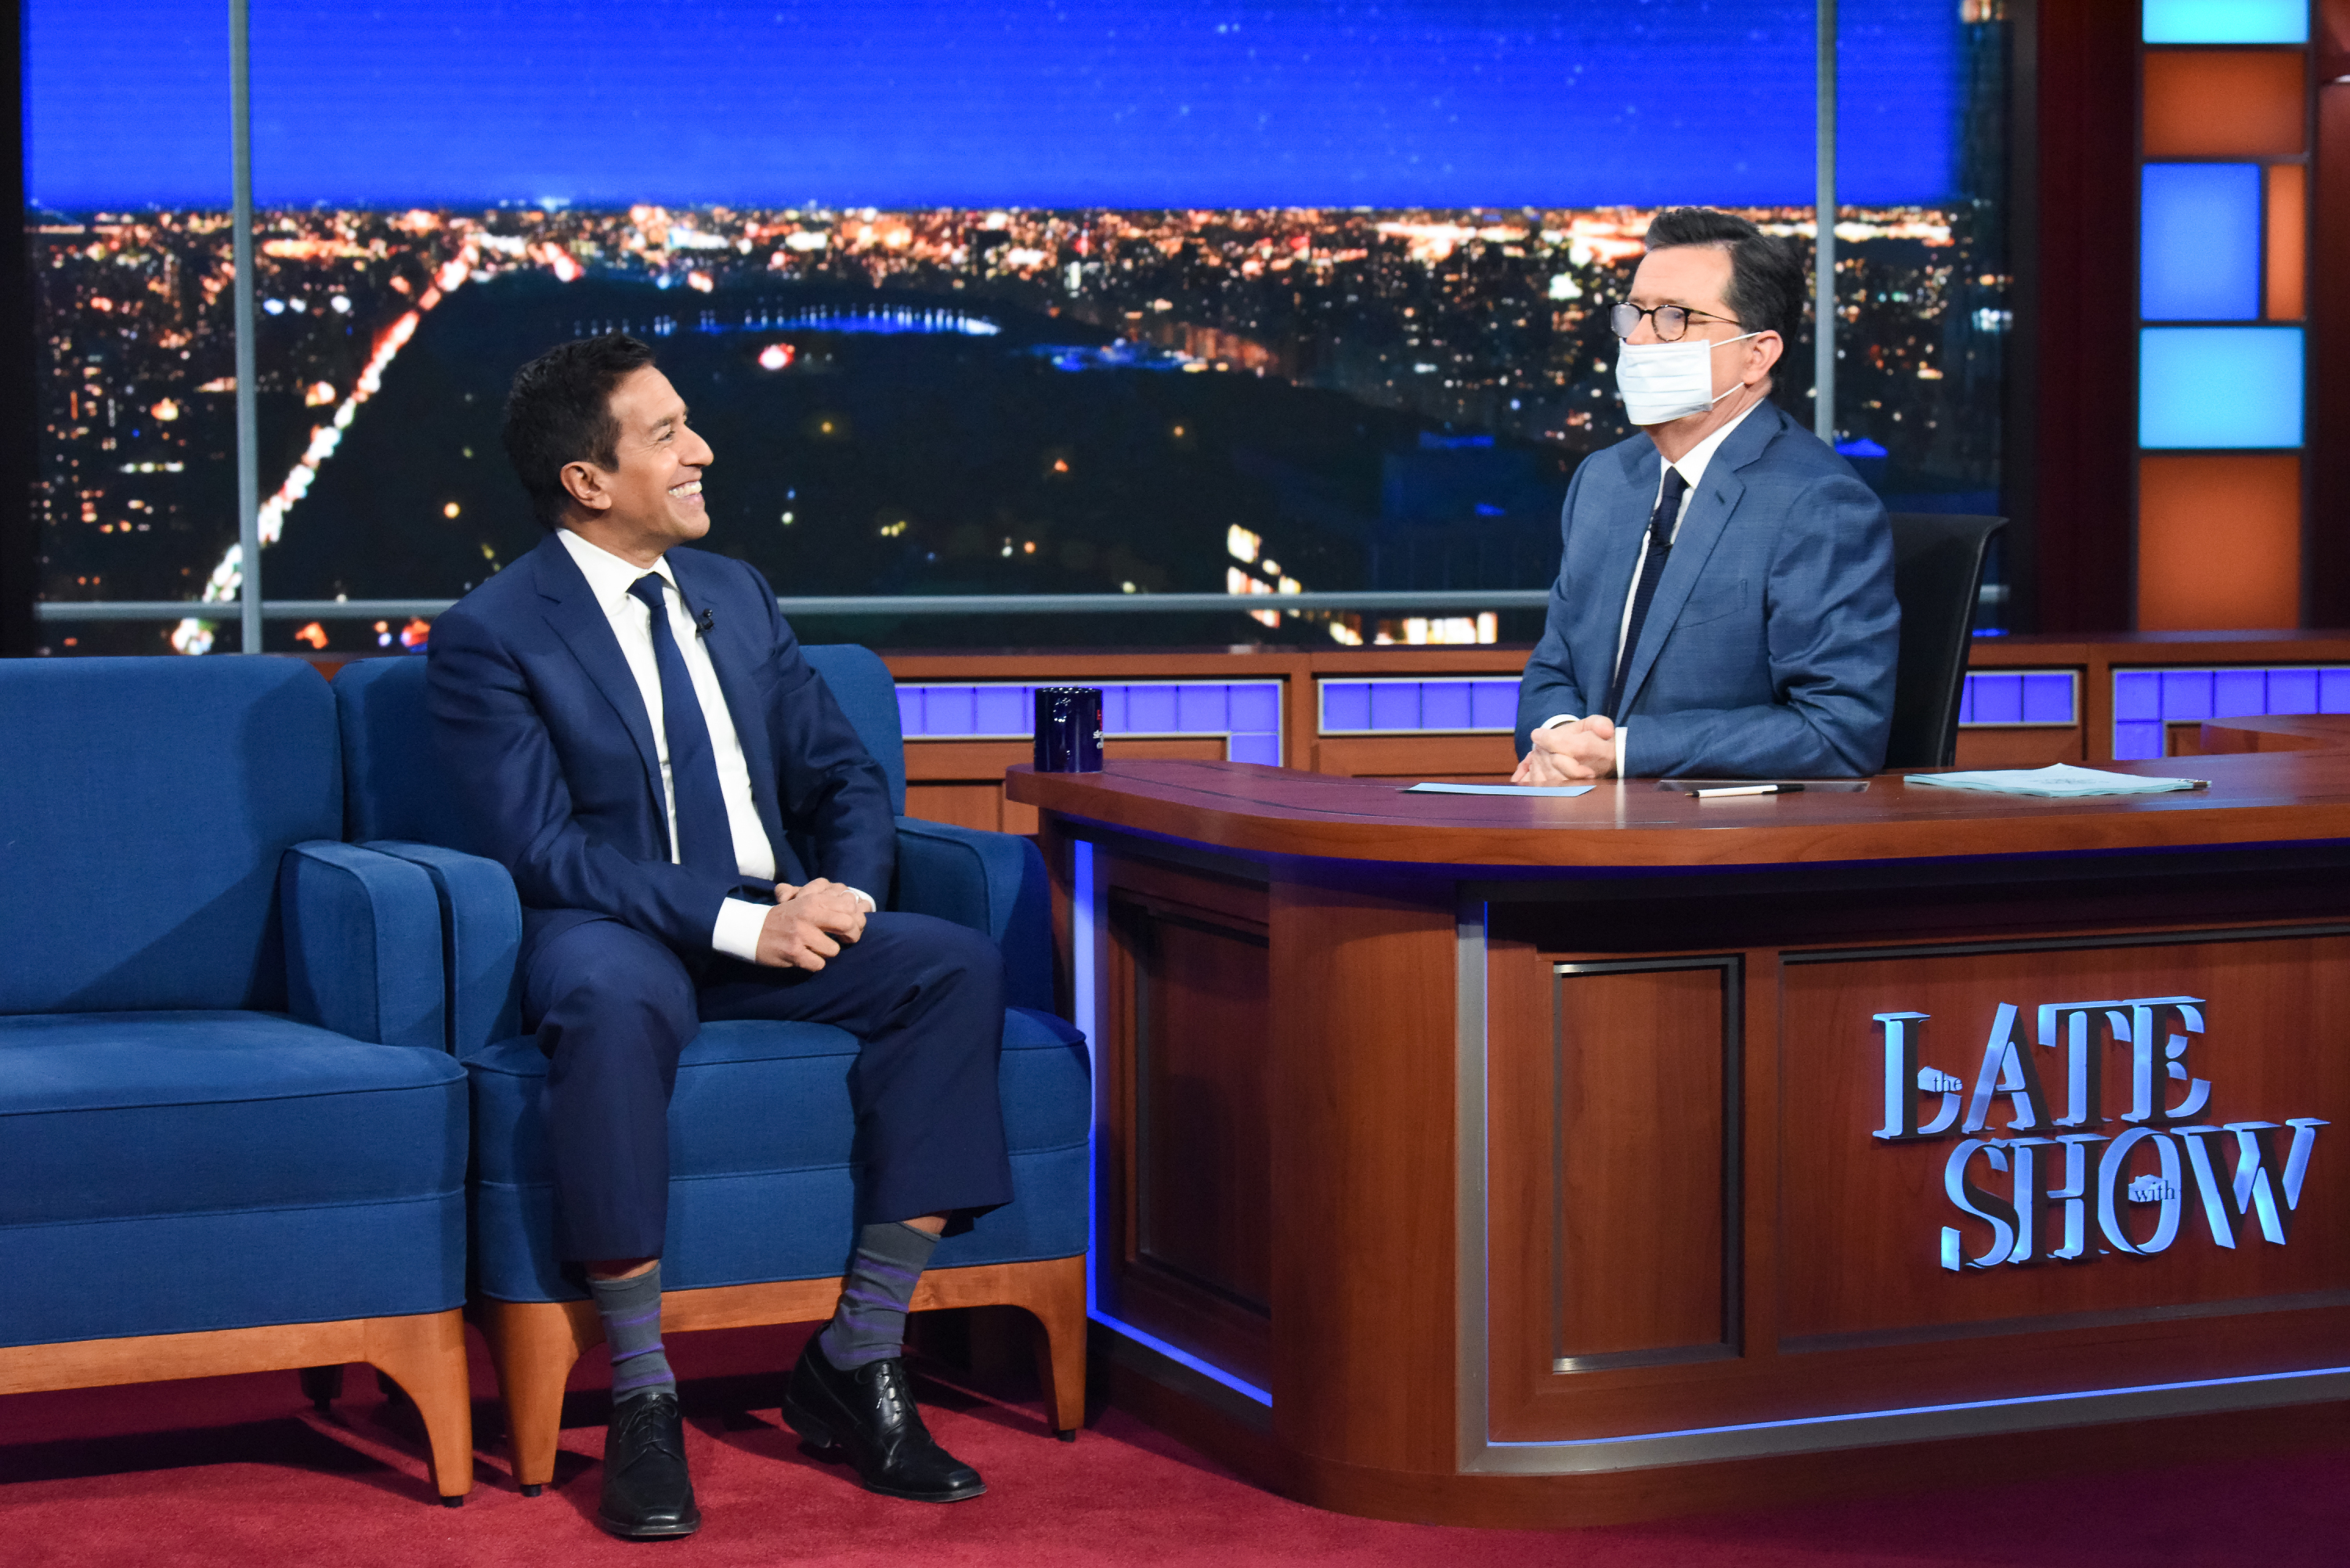 'The Late Show with Stephen Colbert' and guest Dr. Sanjay Gupta during the March 12, 2020 show. (CBS via Getty Images—2020 CBS Photo Archive)